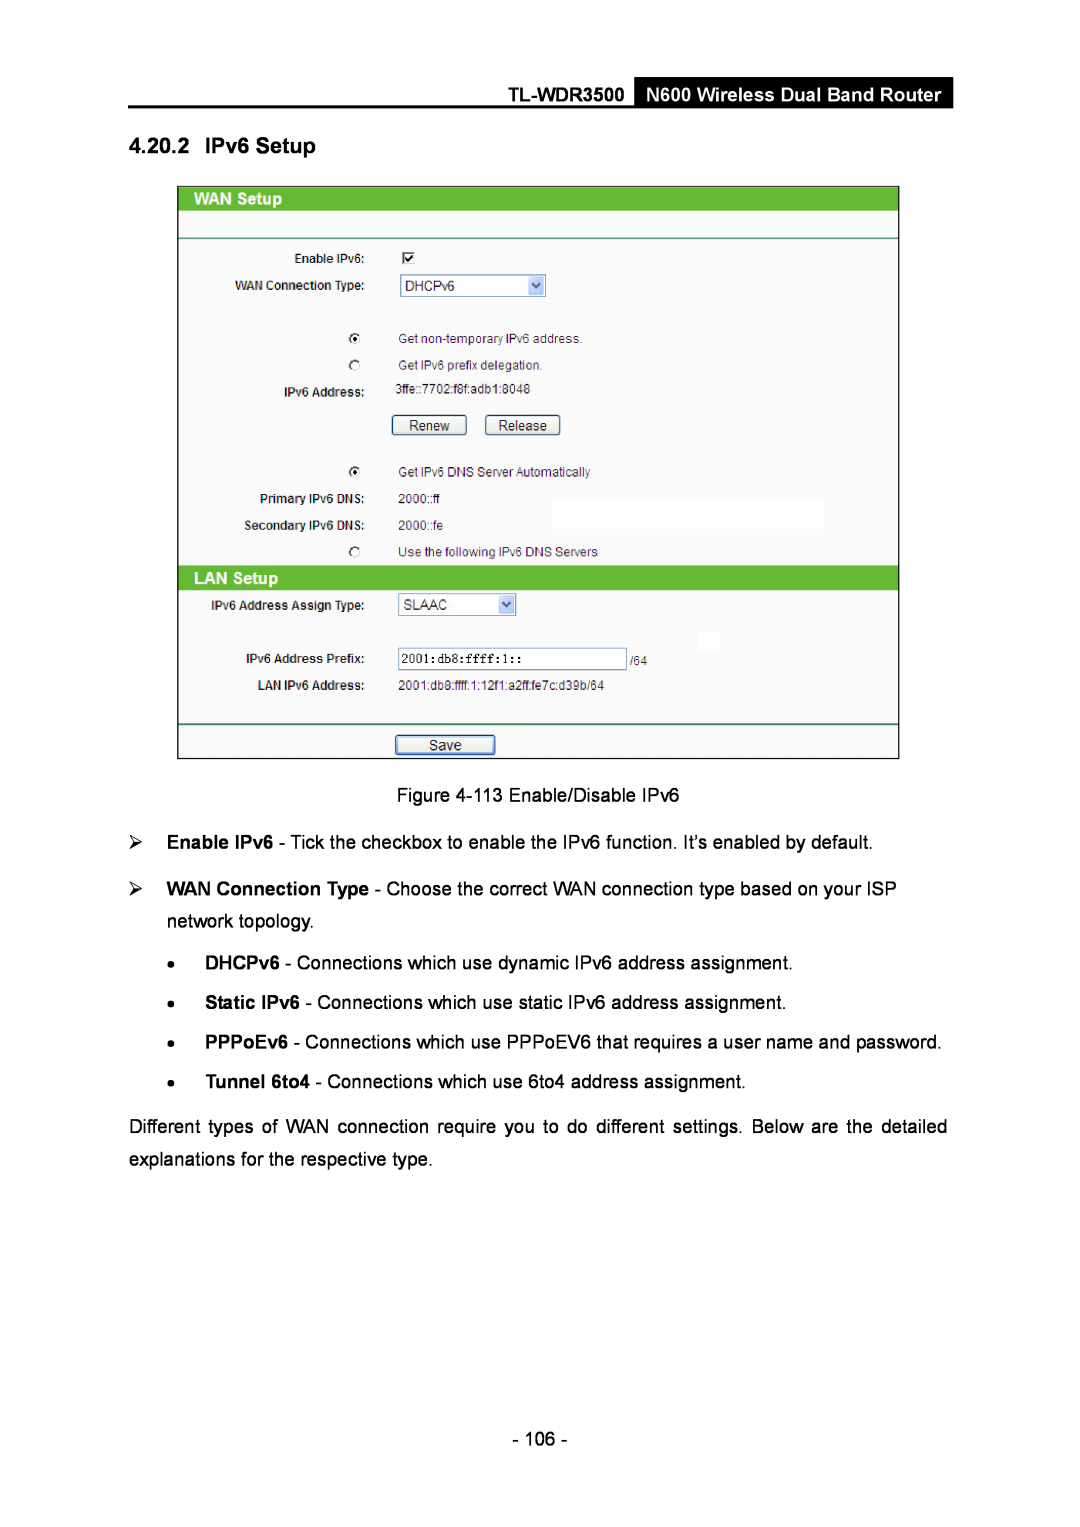 TP-Link manual 4.20.2 IPv6 Setup, TL-WDR3500 N600 Wireless Dual Band Router 